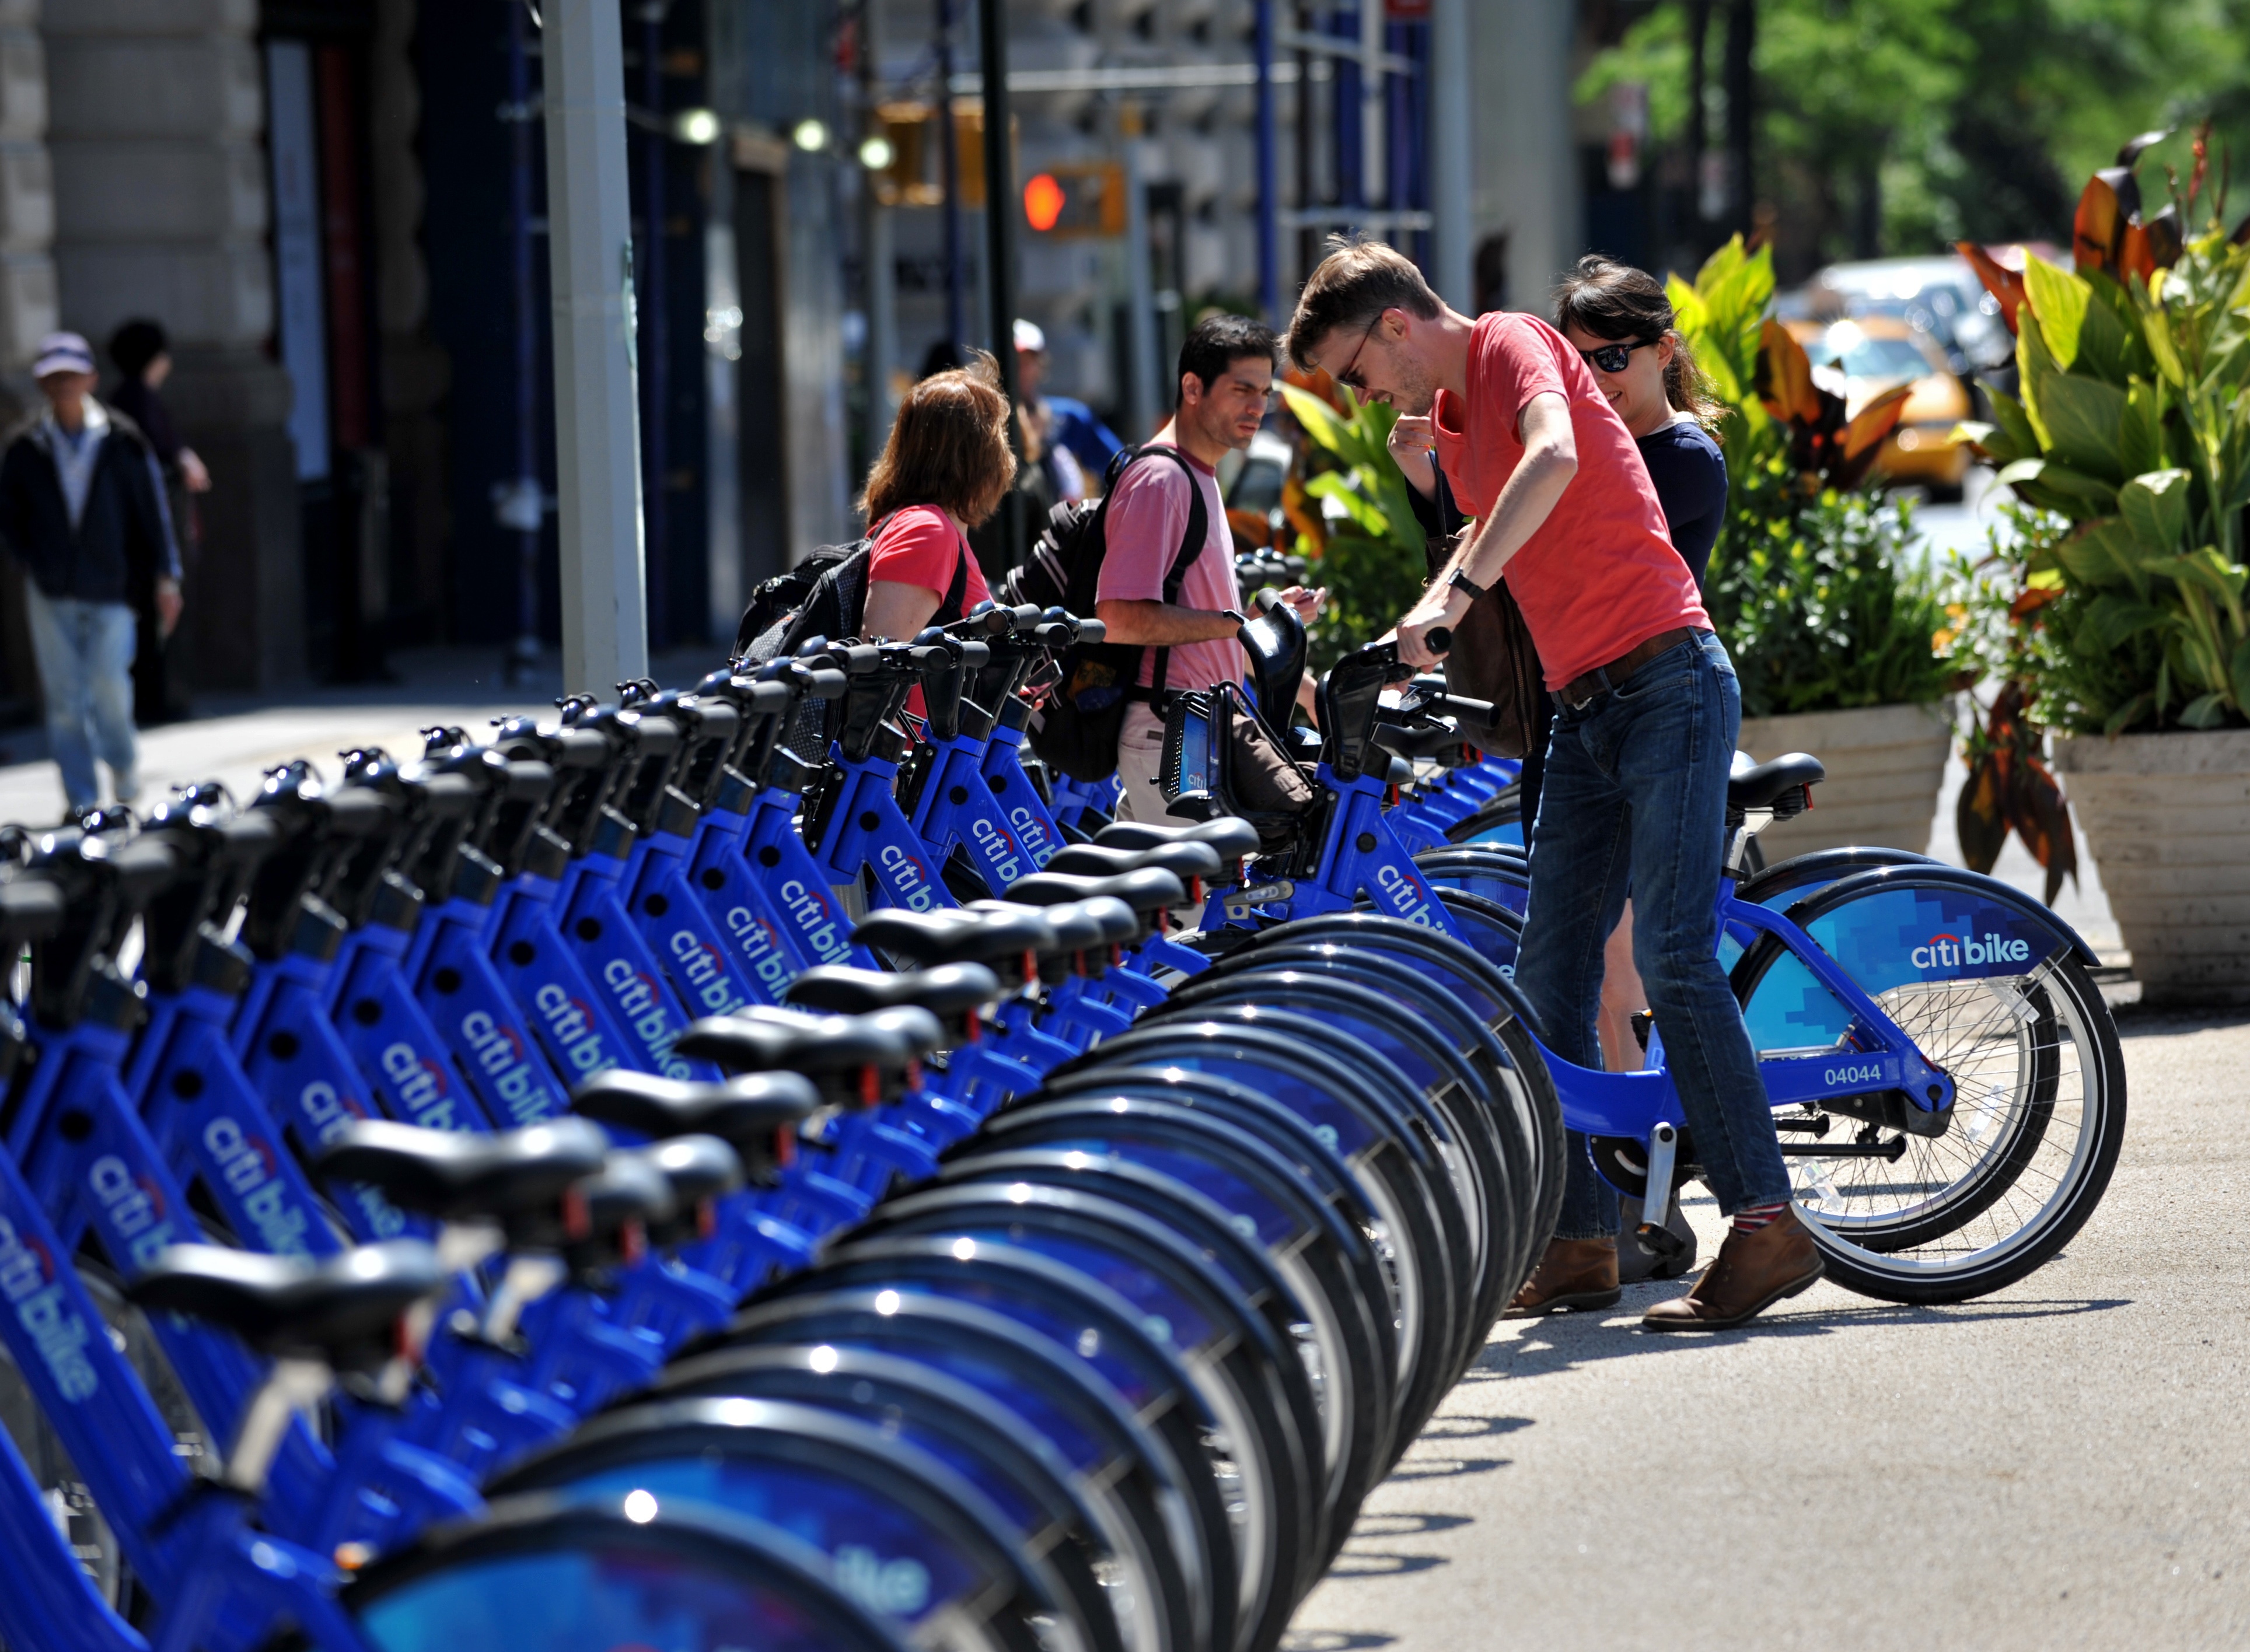 A Citi Bike docking station. (Photo by Stan Honda/AFP/Getty Images)